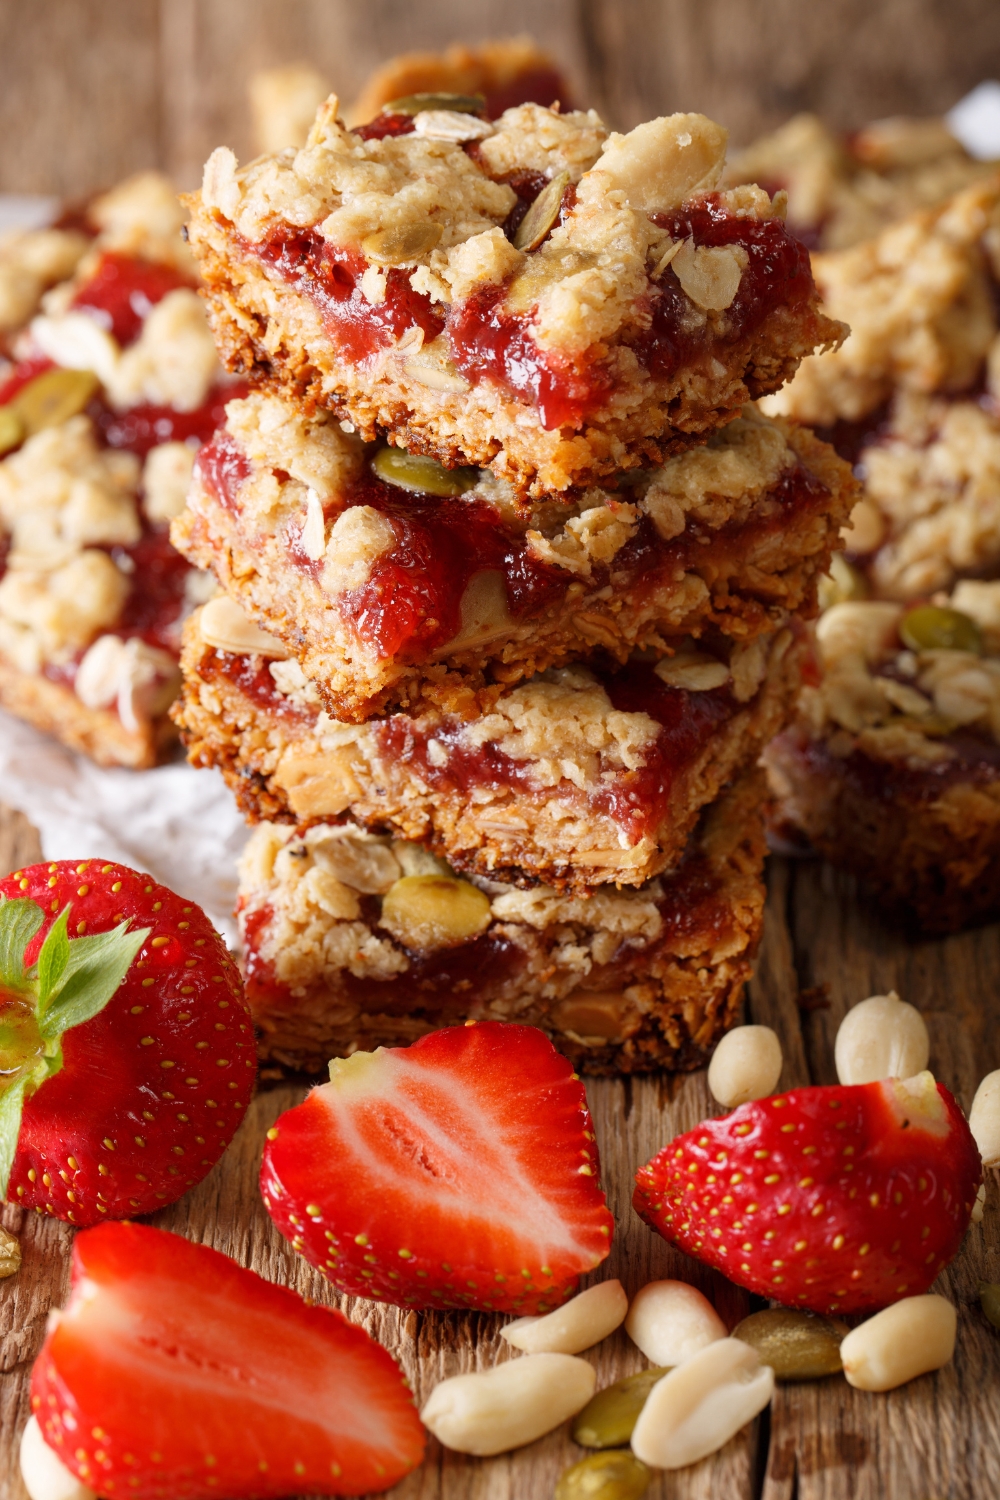 Homemade Strawberry Oatmeal Bars with Peanuts